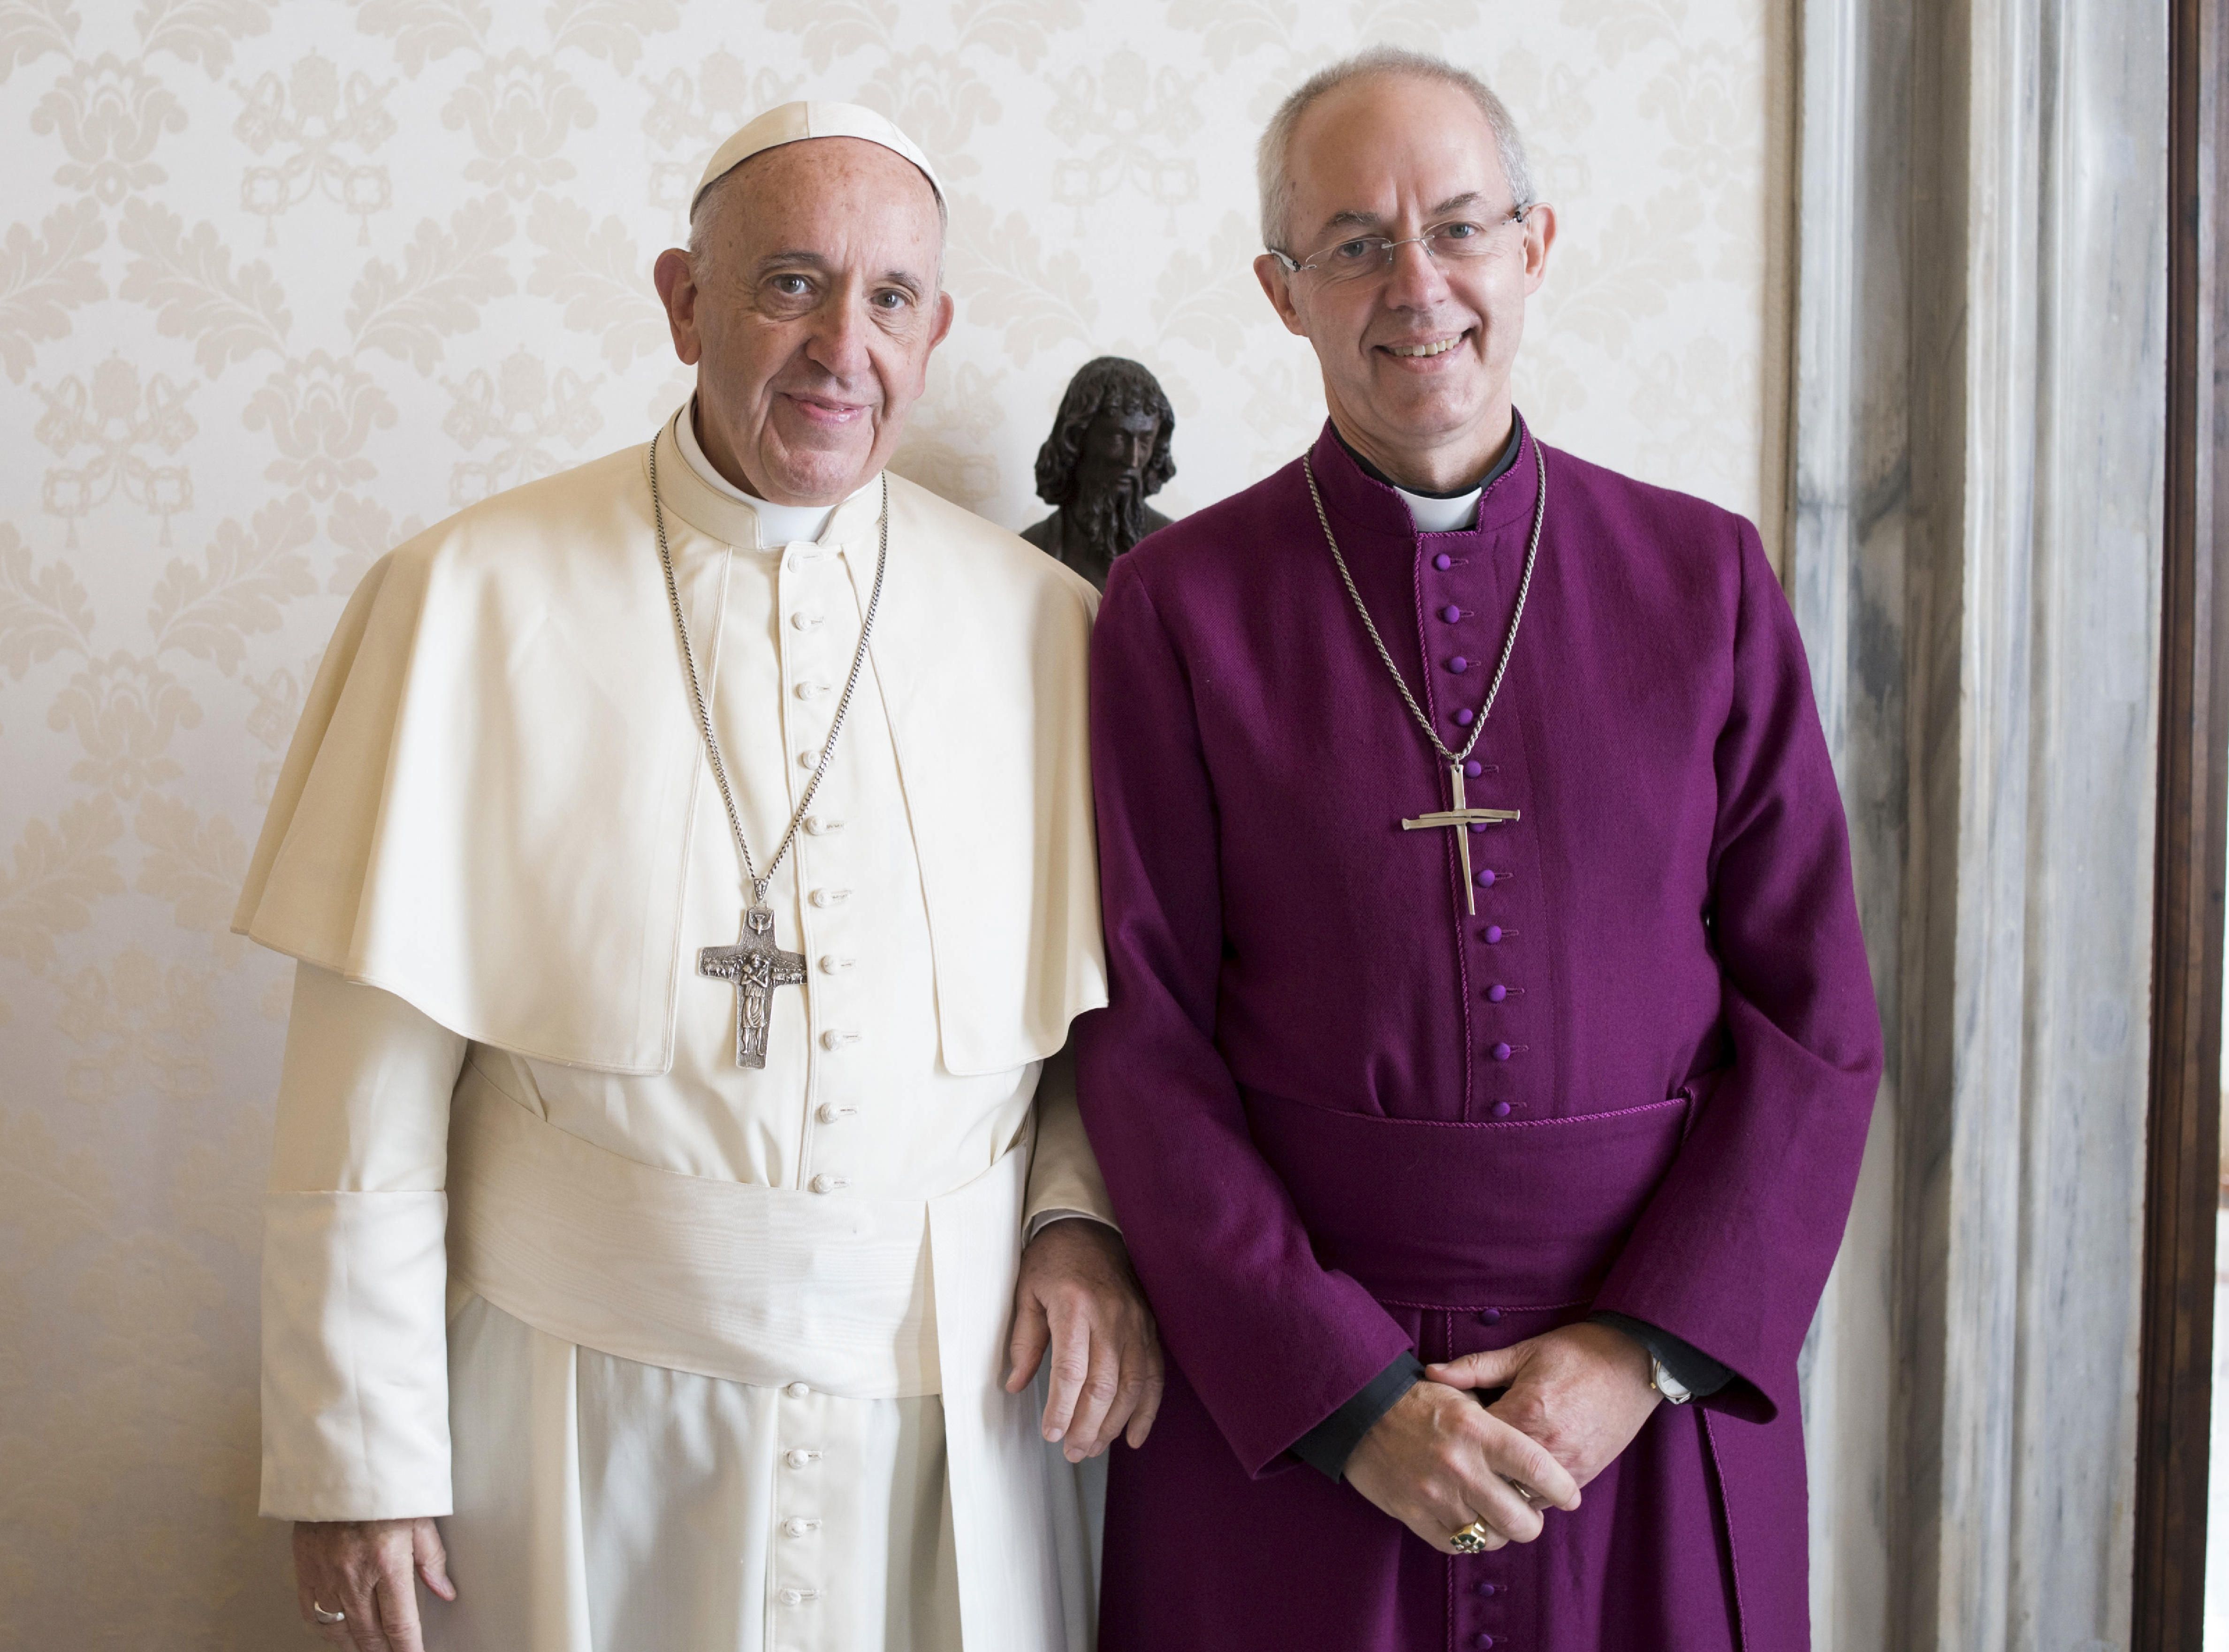 Justin Welby pays tribute to Pope Francis on tenth anniversary of inauguration